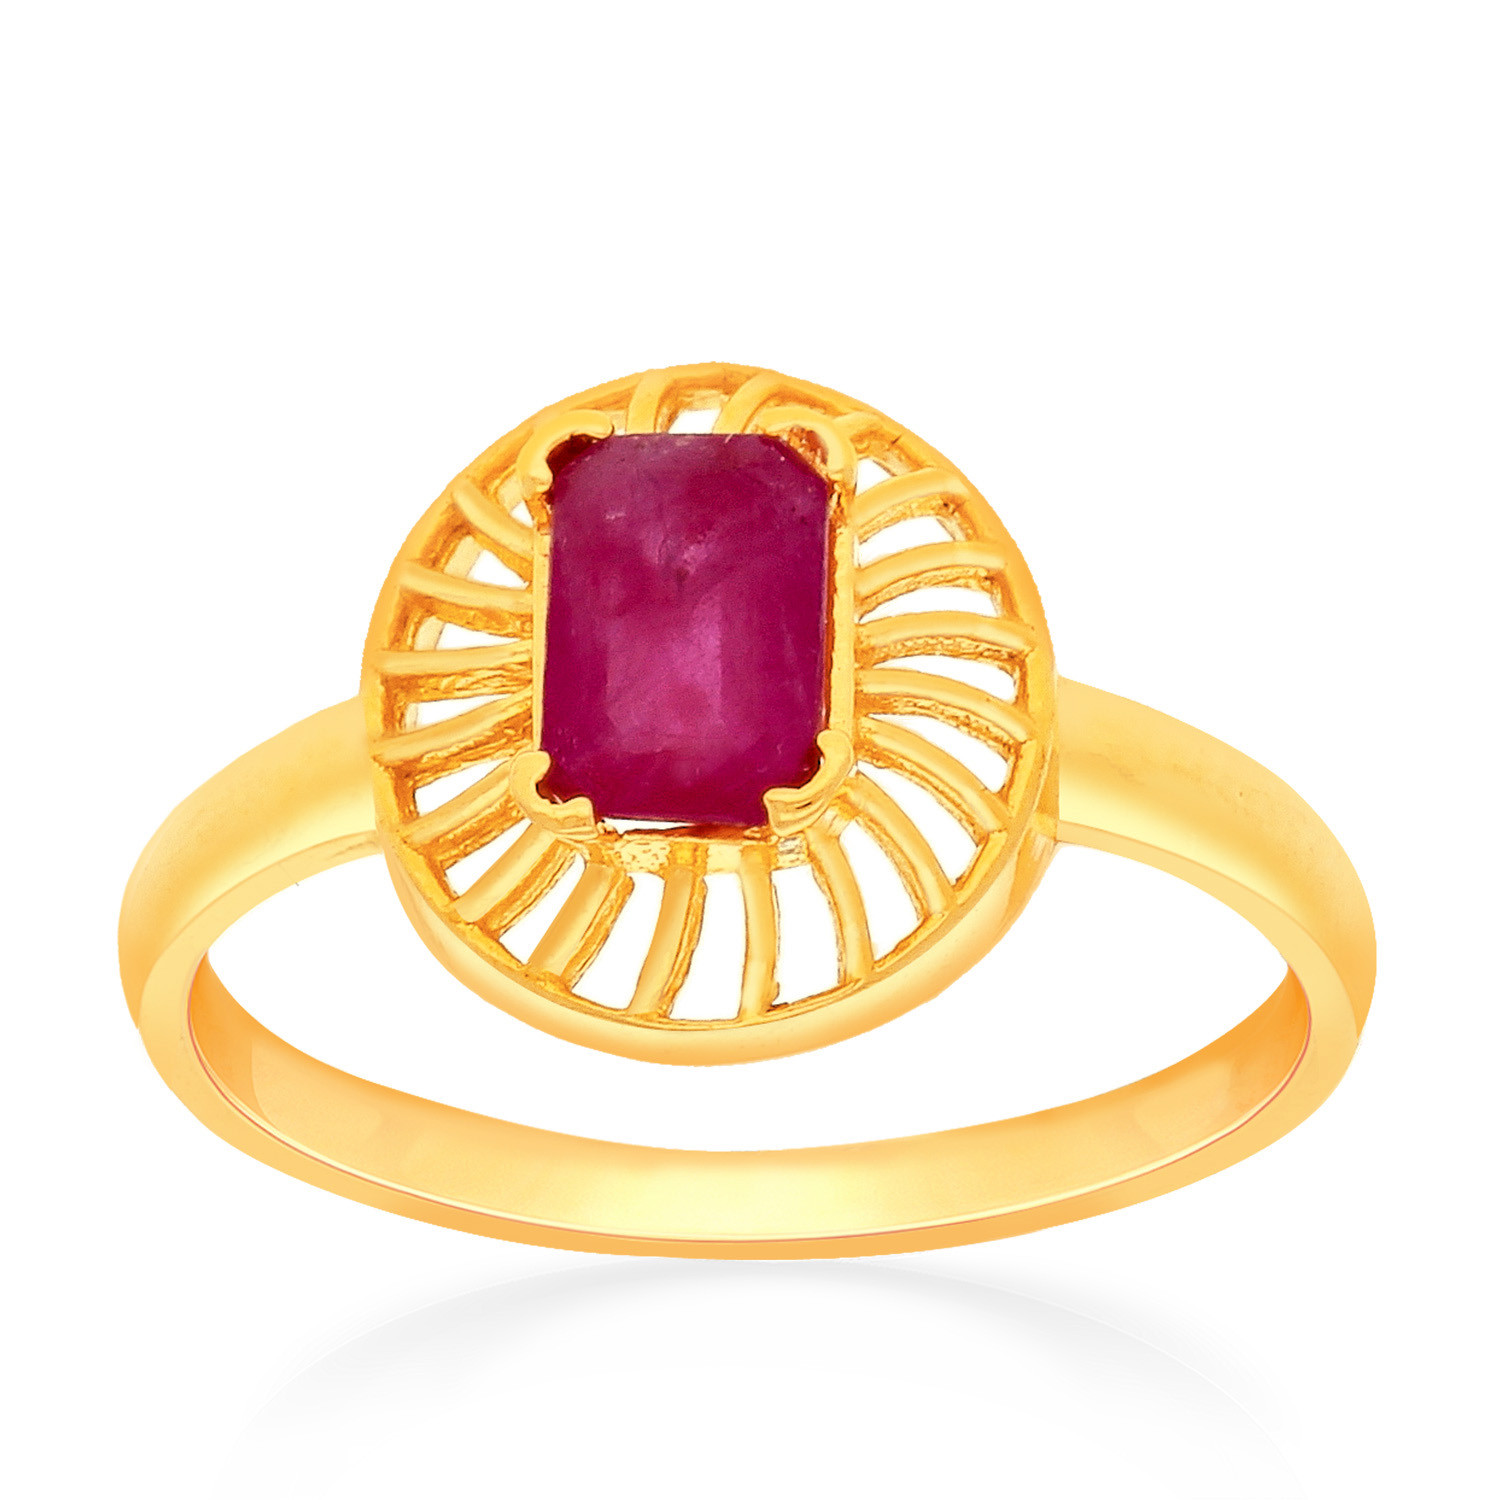 Malabar Gold Ruby Finger ring with weight and price #cuttacktop10  #malabargoldanddiamonds - YouTube